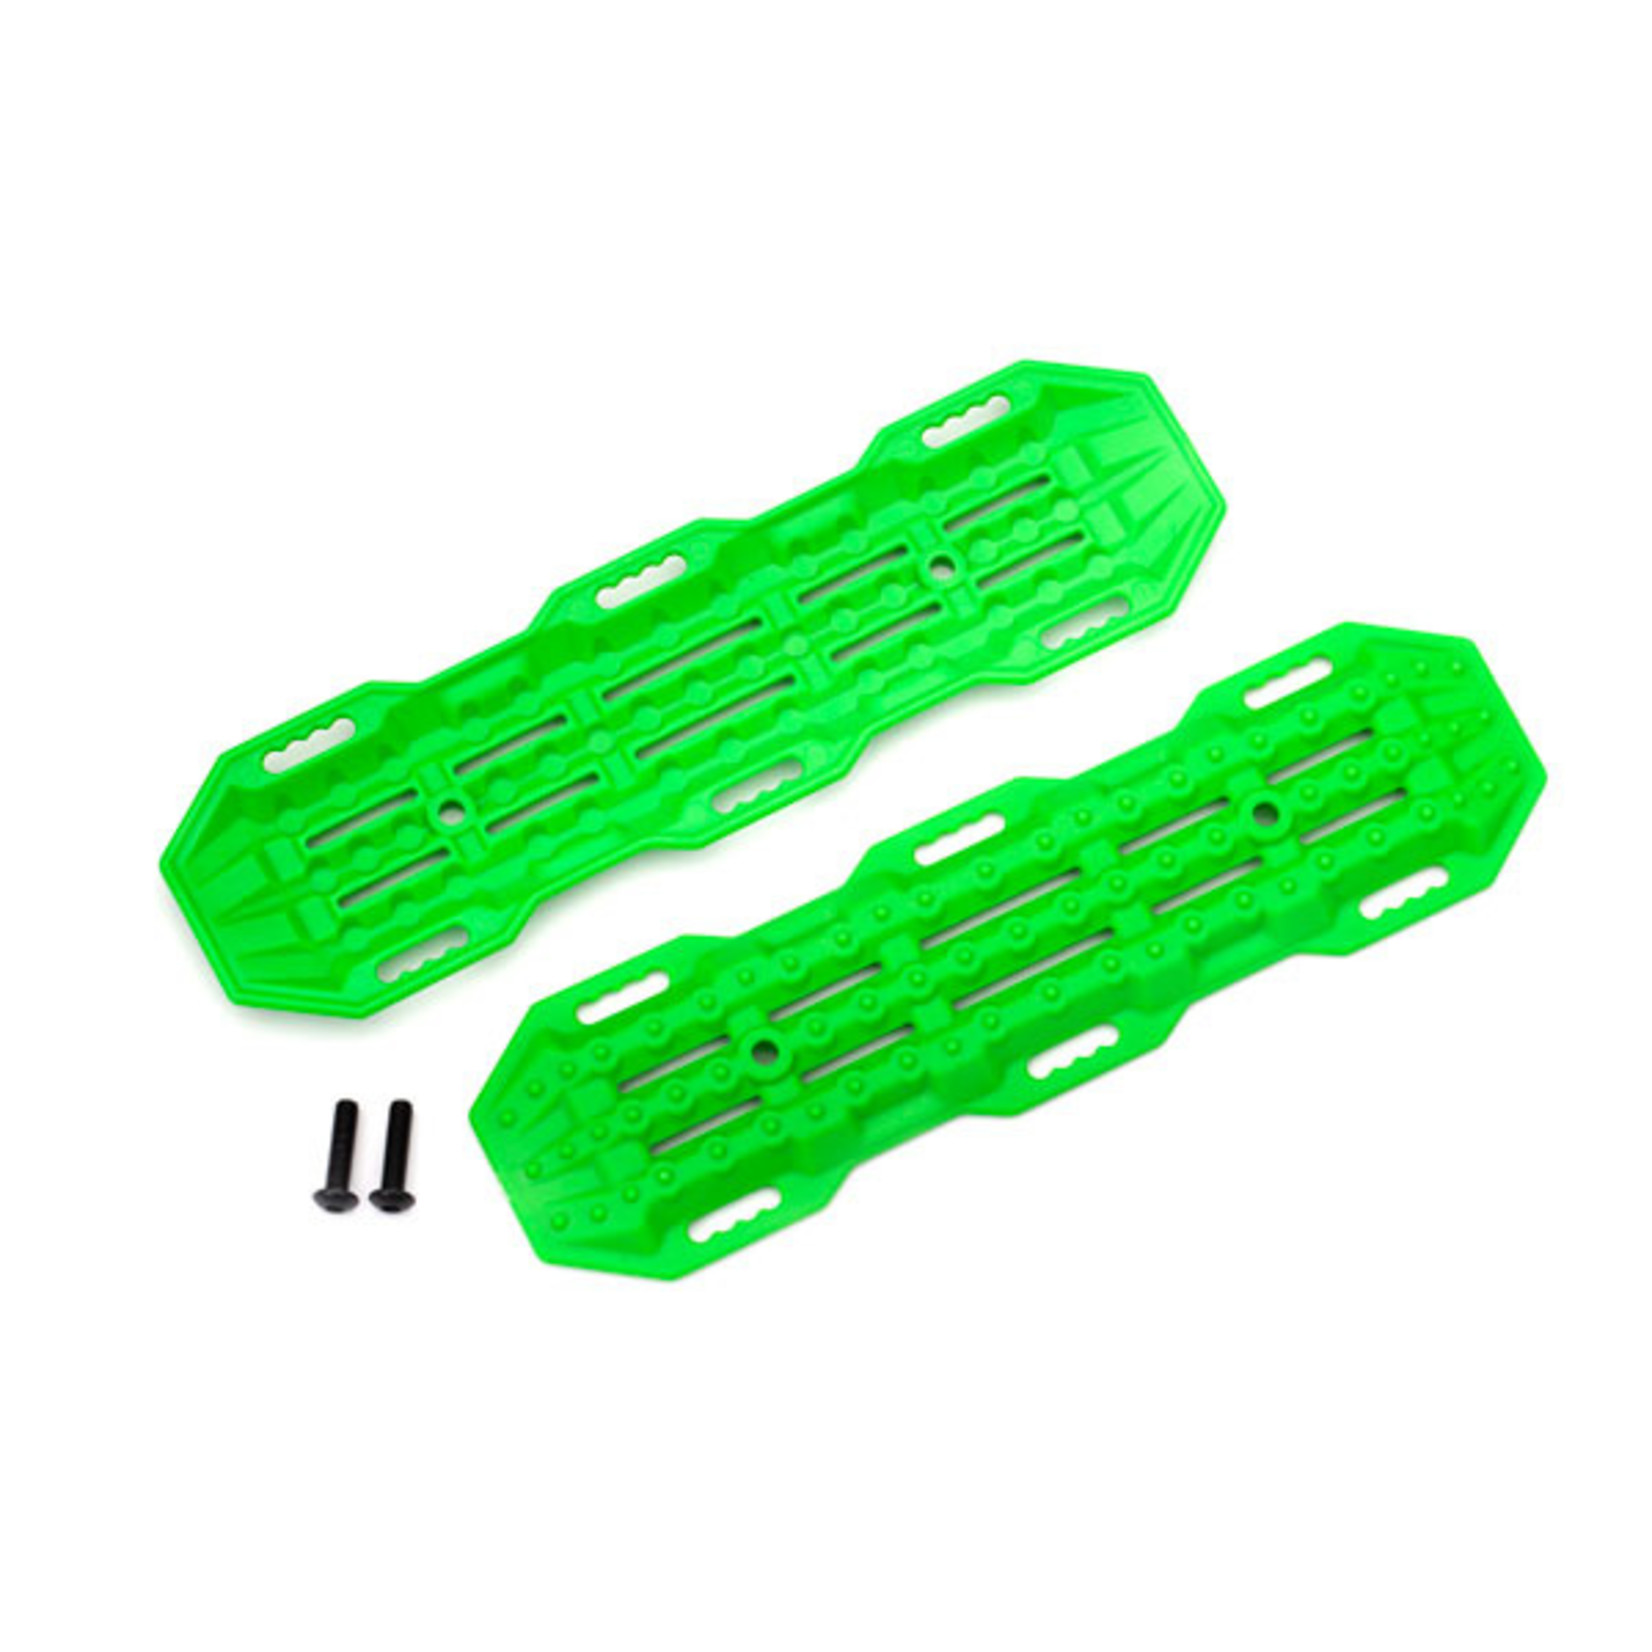 Traxxas 8121G - Traction boards, green/ mounting hardware